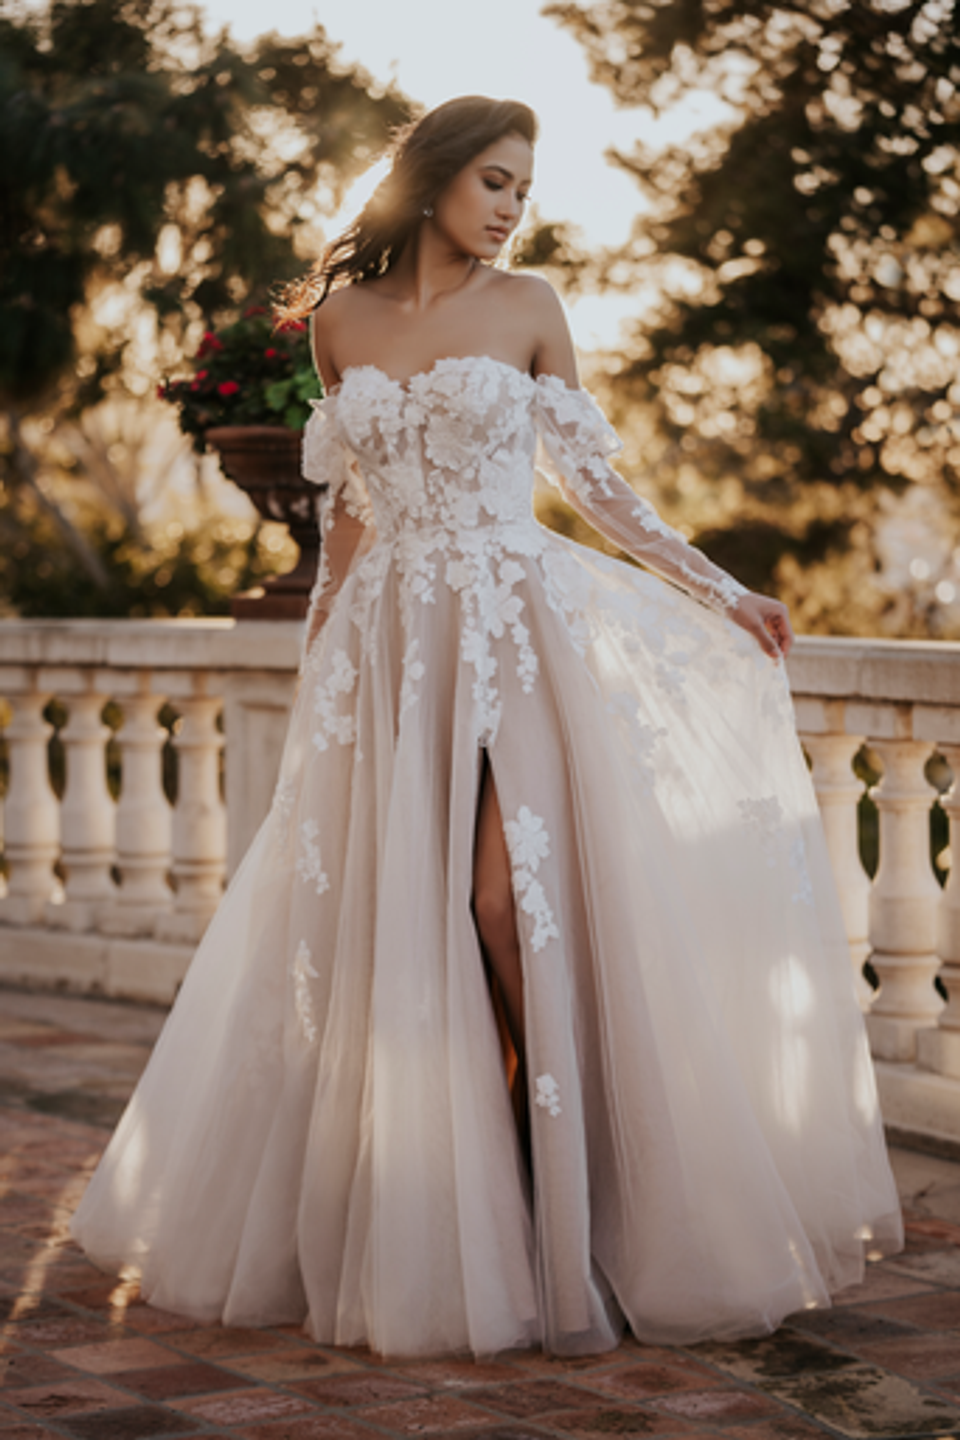 Lace Off the Shoulder Fitted Crepe Wedding Dress  Allure bridal, Allure wedding  dresses, Crepe wedding dress